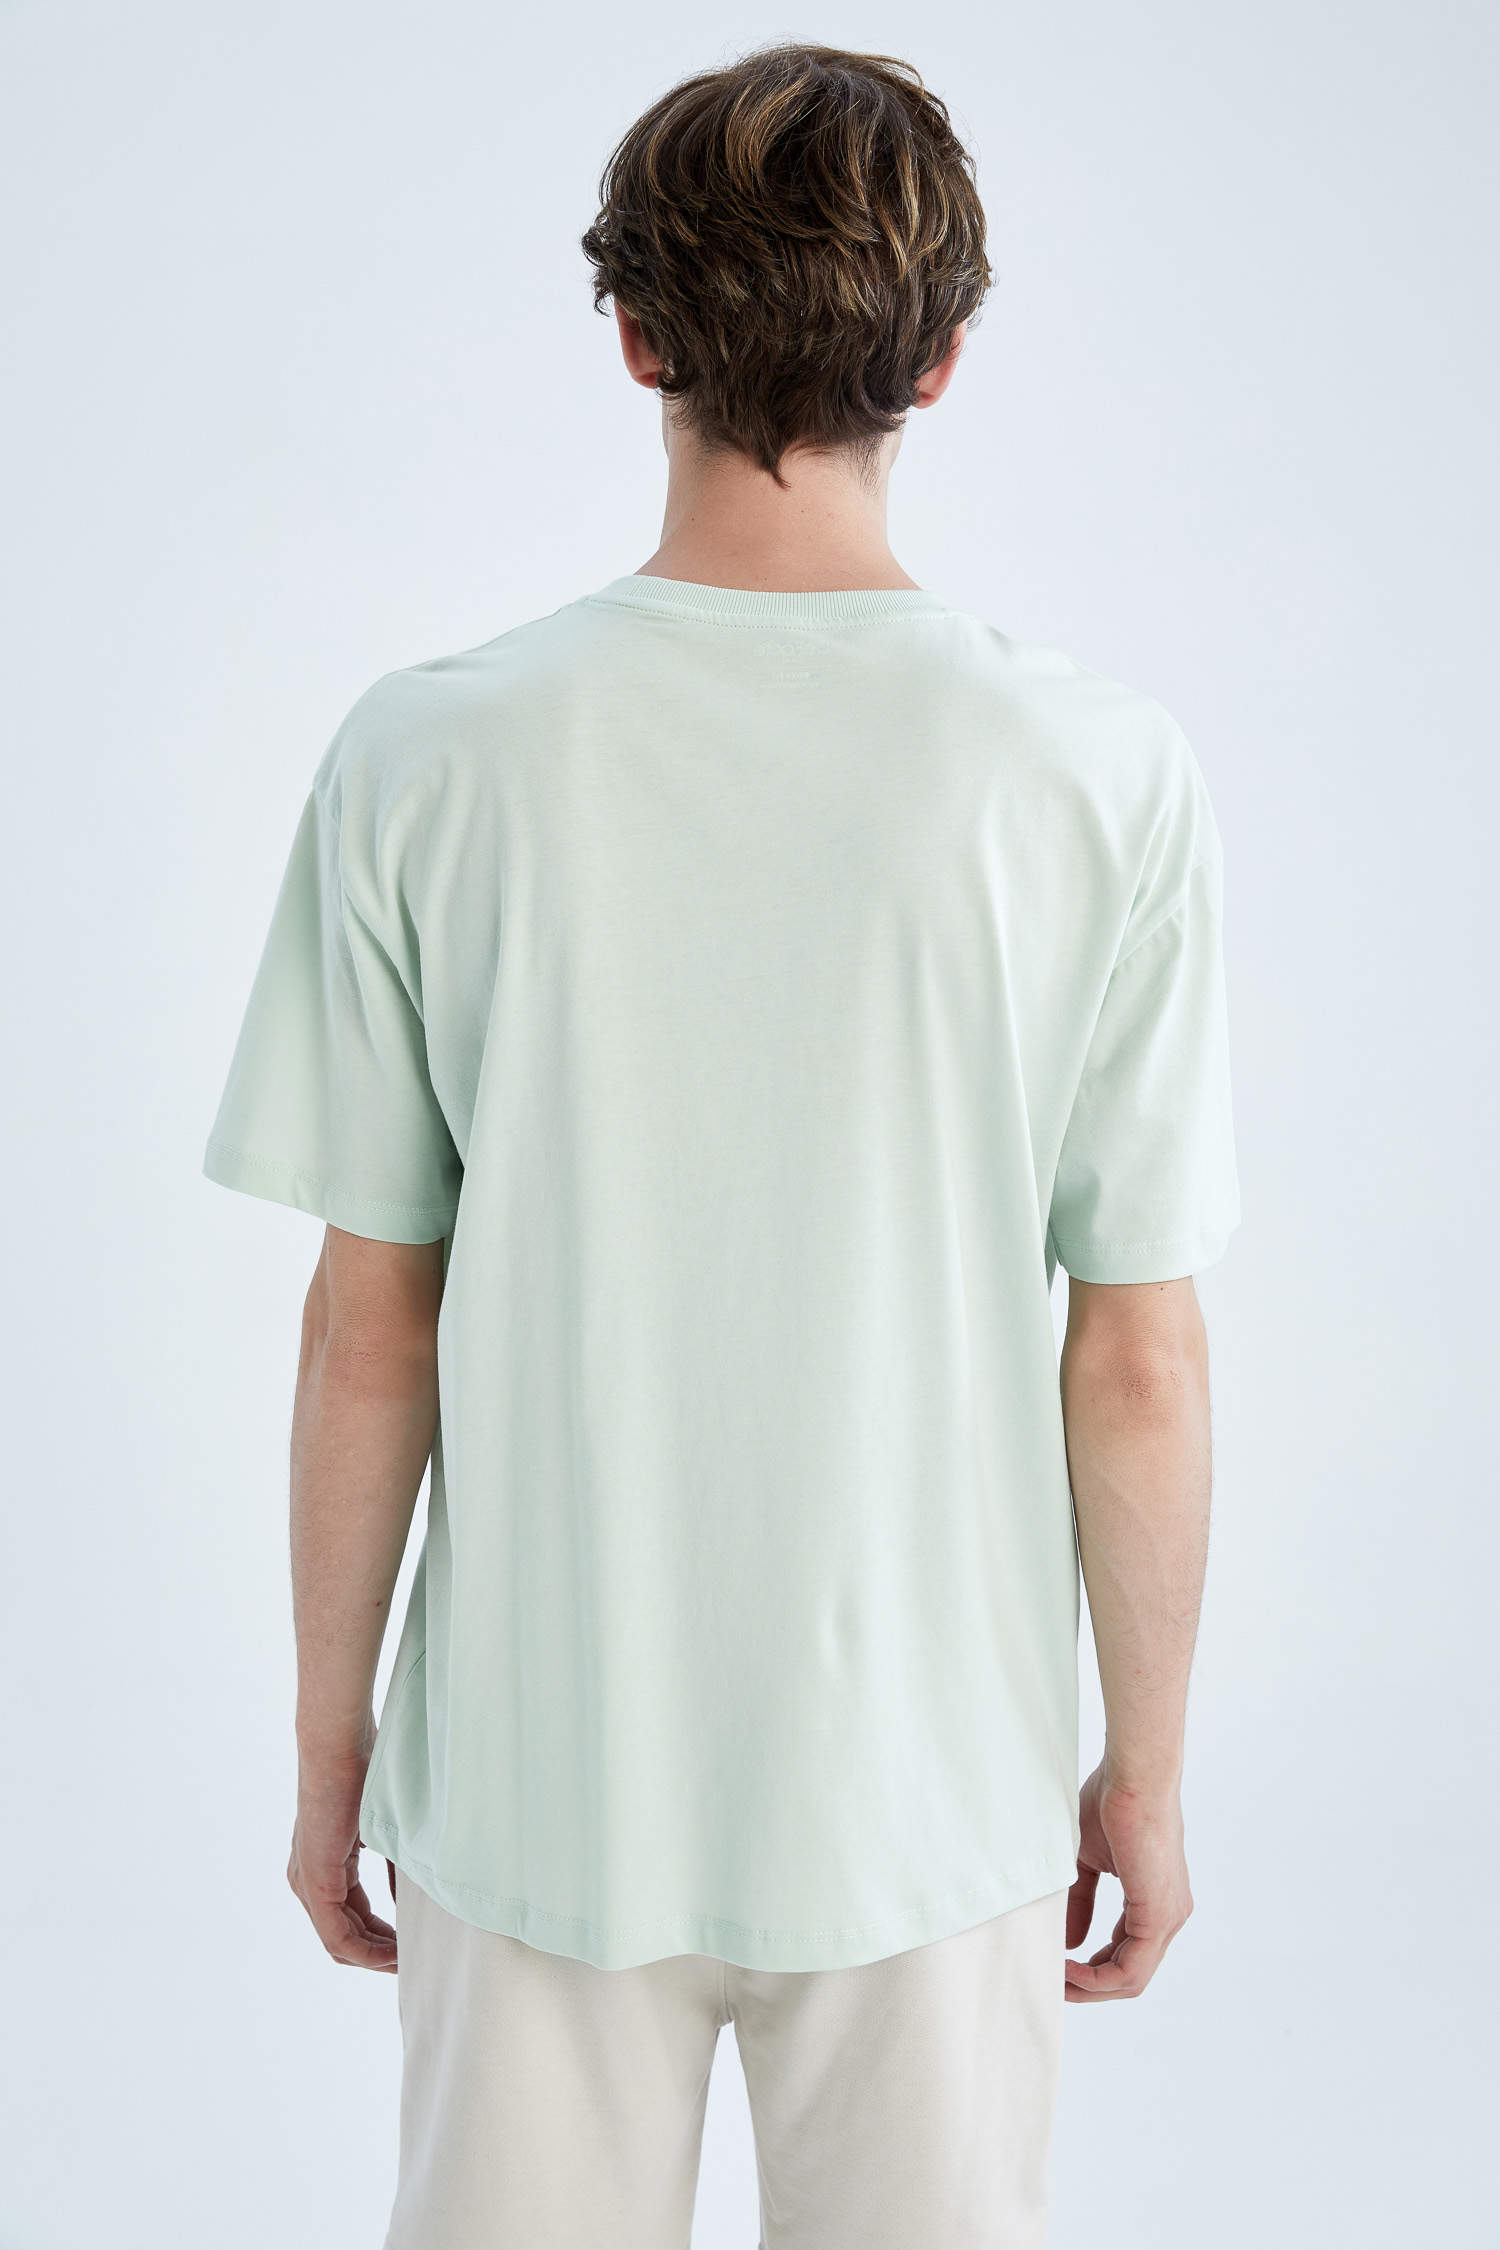 Turquoise Man Boxy Fit Crew Neck Printed T-Shirt 2533405 | DeFacto